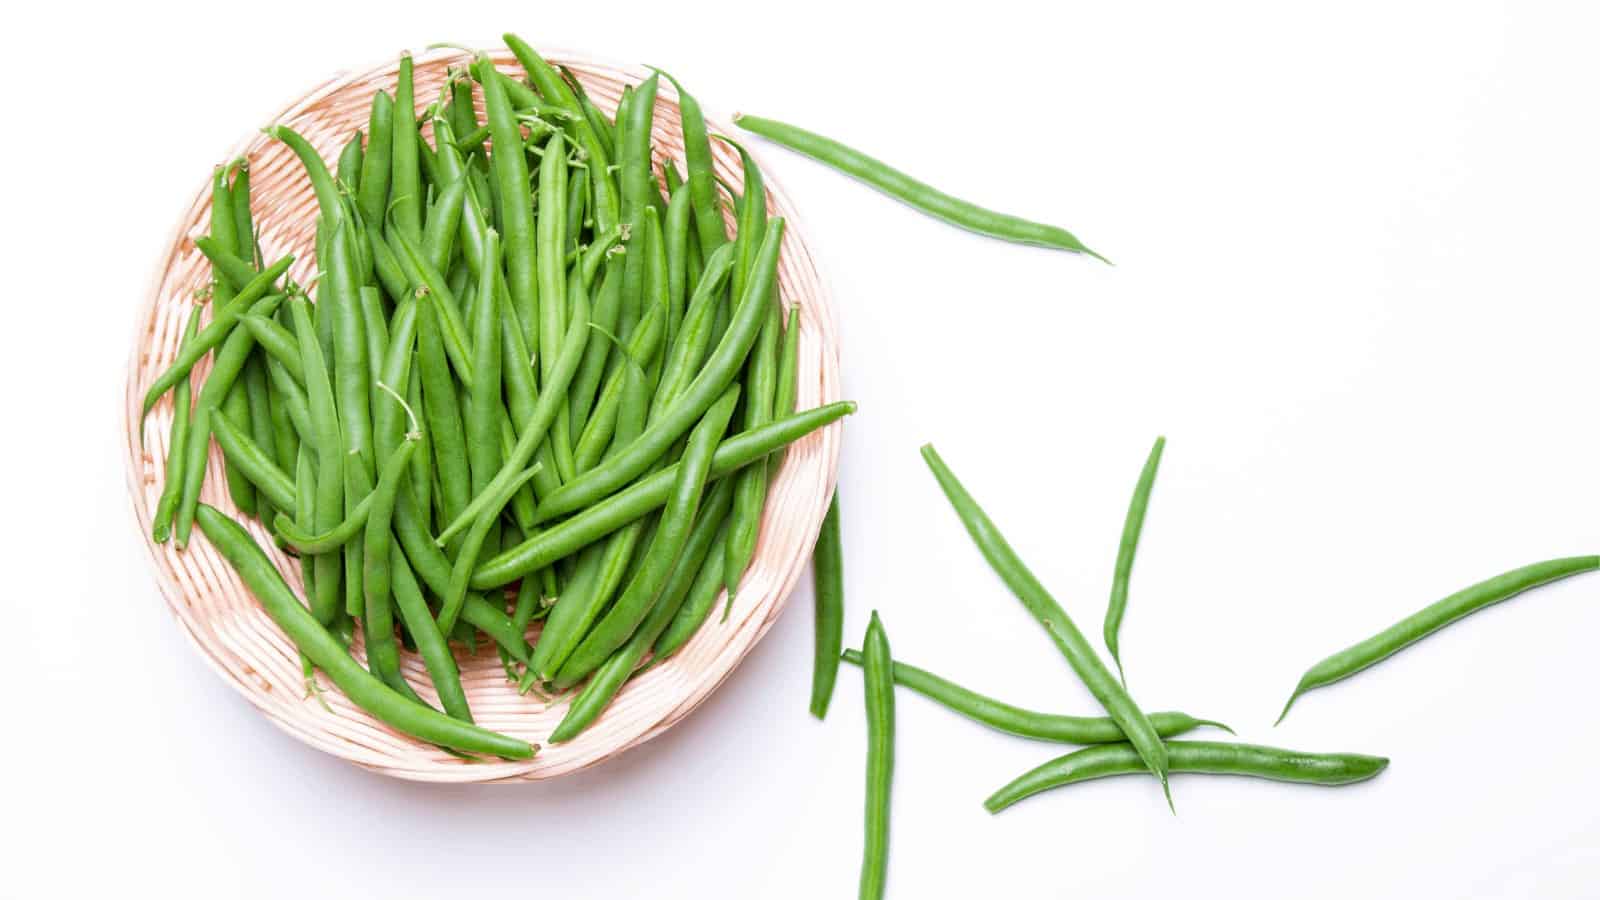 Nutritionists Reveal Their 3 Favorite Ways to Prepare Green Beans